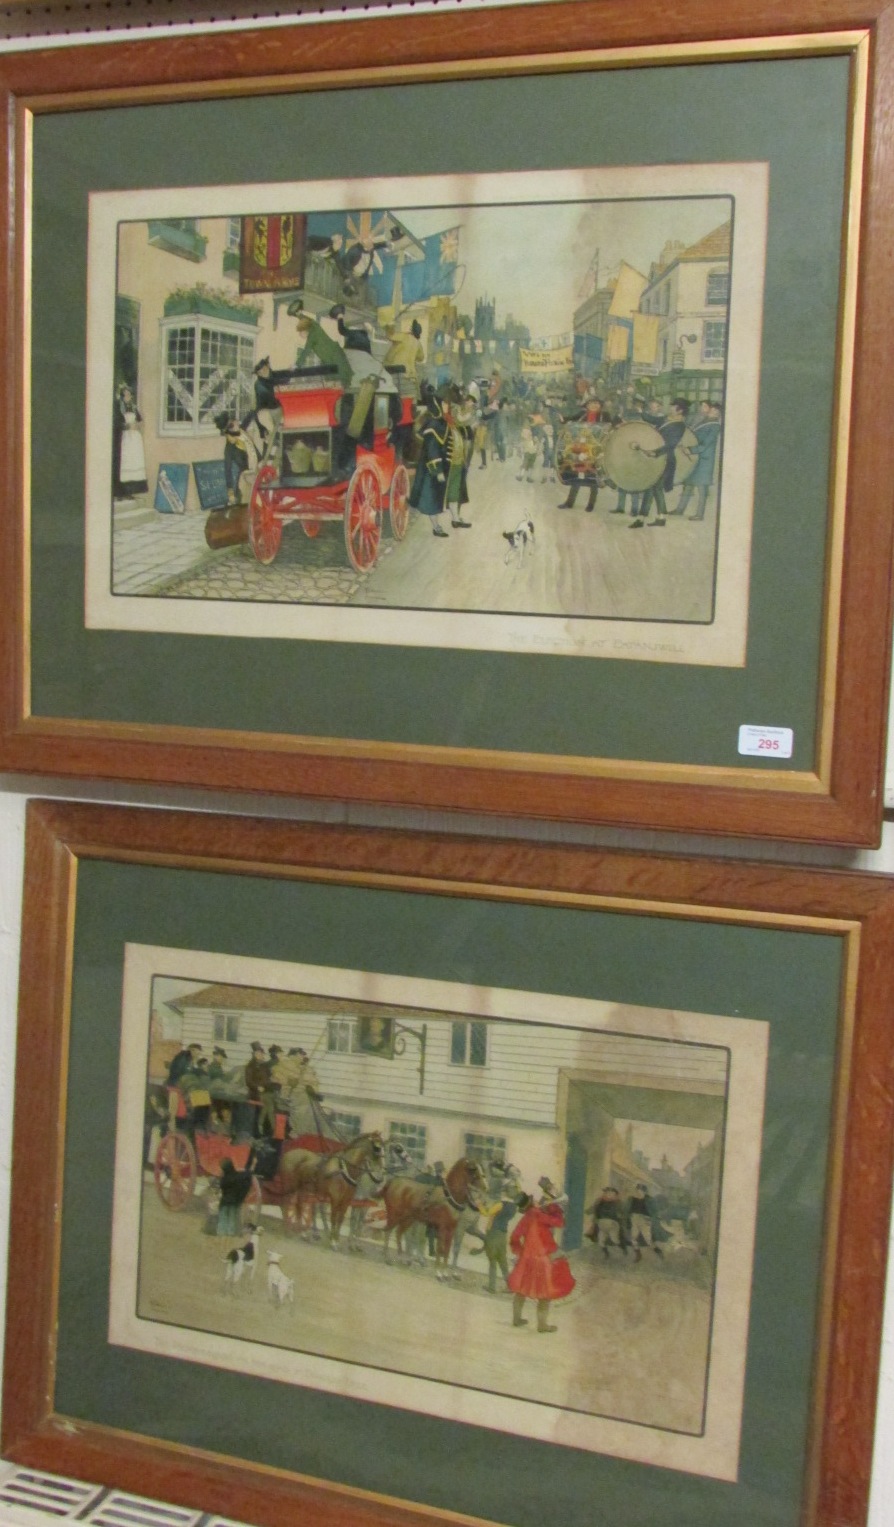 Two colour prints of Dickensian scenes after Albert Ludovici published by Raphael Tuck & Sons - 'The